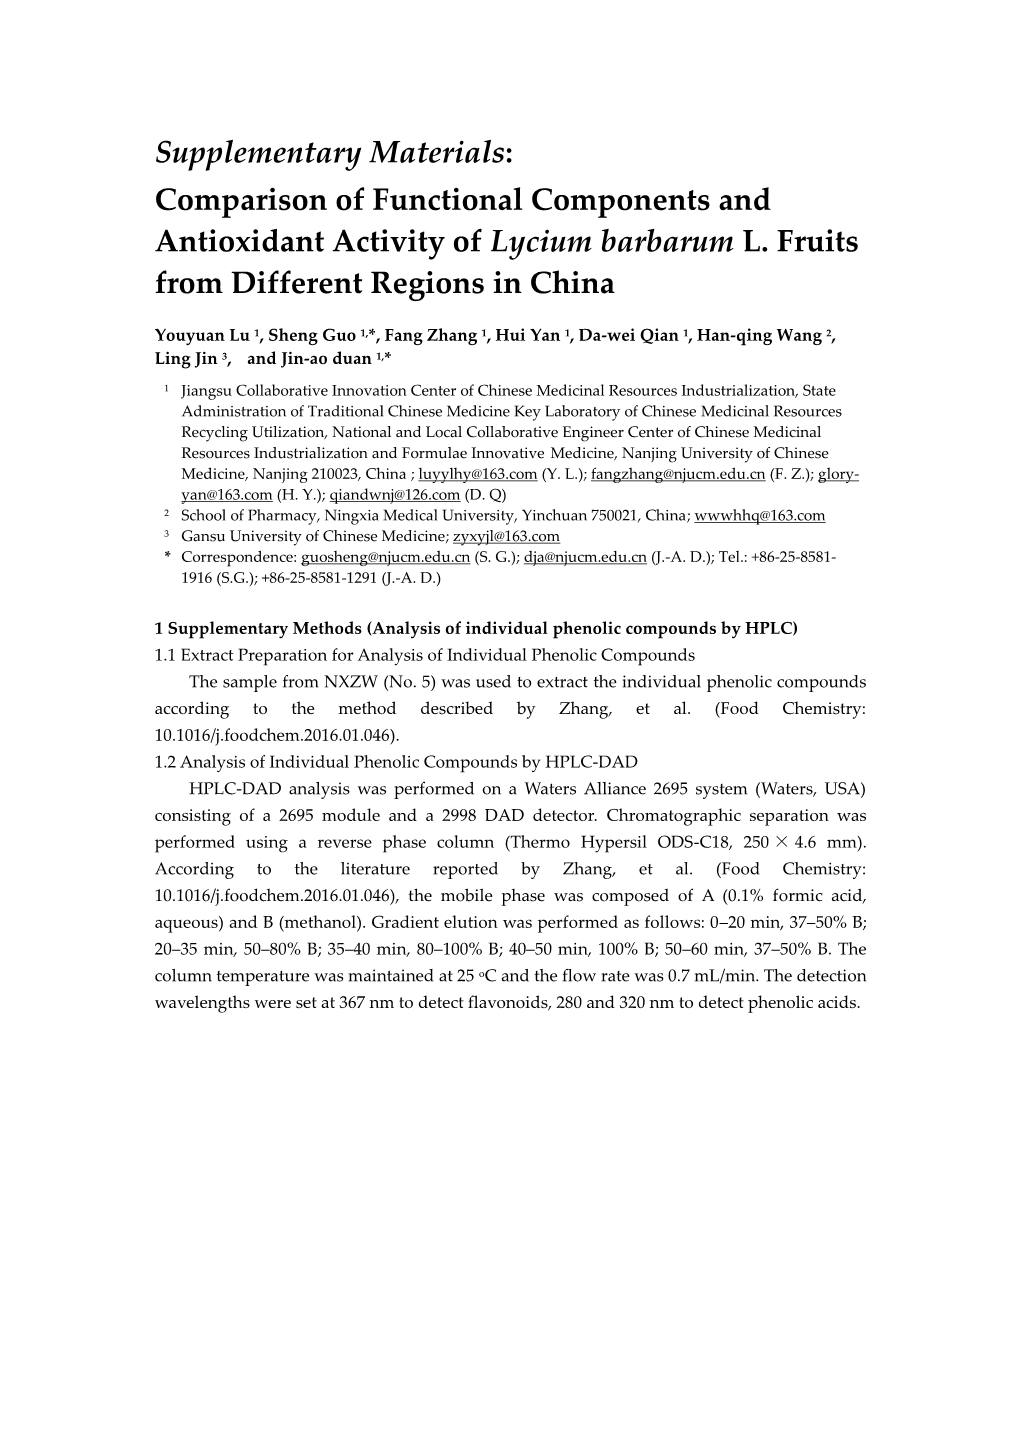 Comparison of Functional Components and Antioxidant Activity of Lycium Barbarum L. Fruits from Different Regions in China